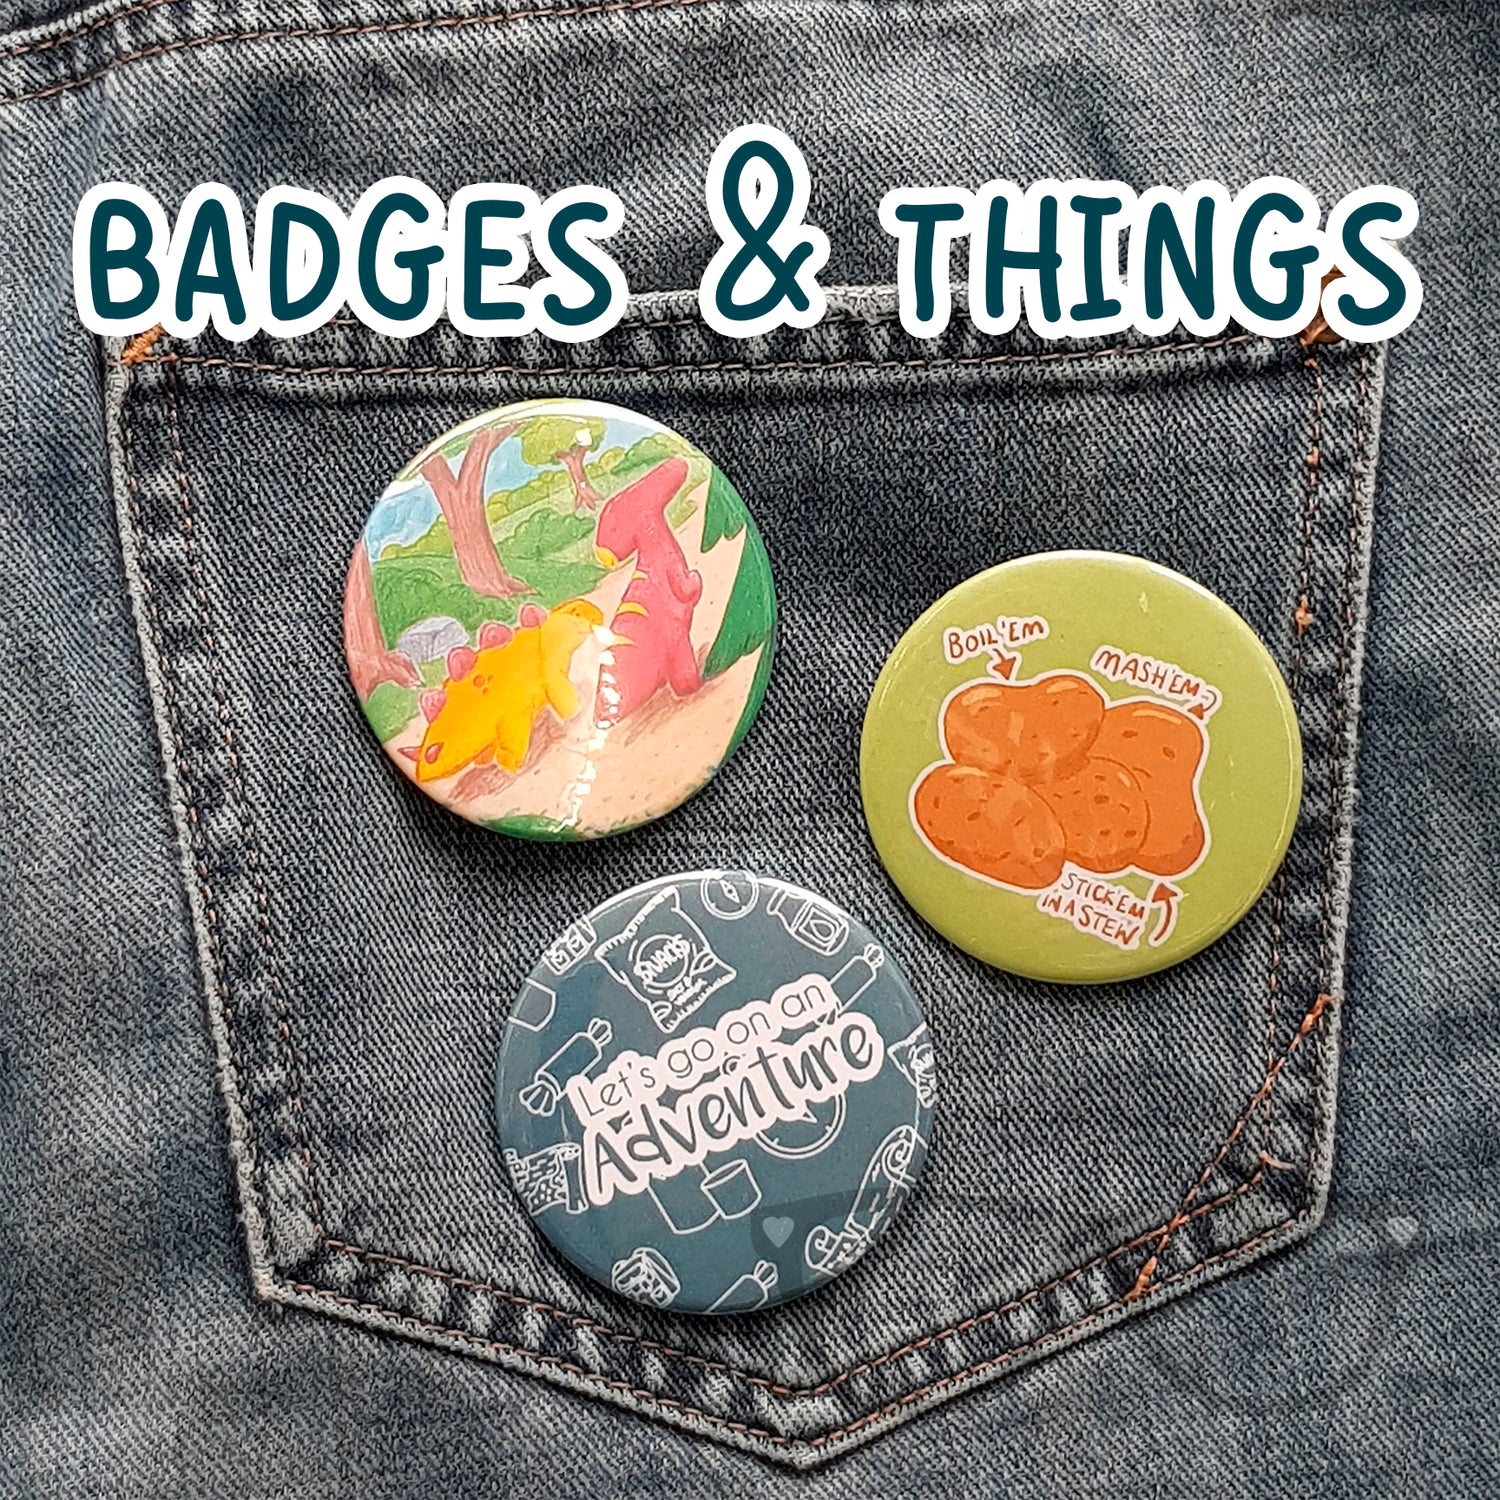 Badges and Things